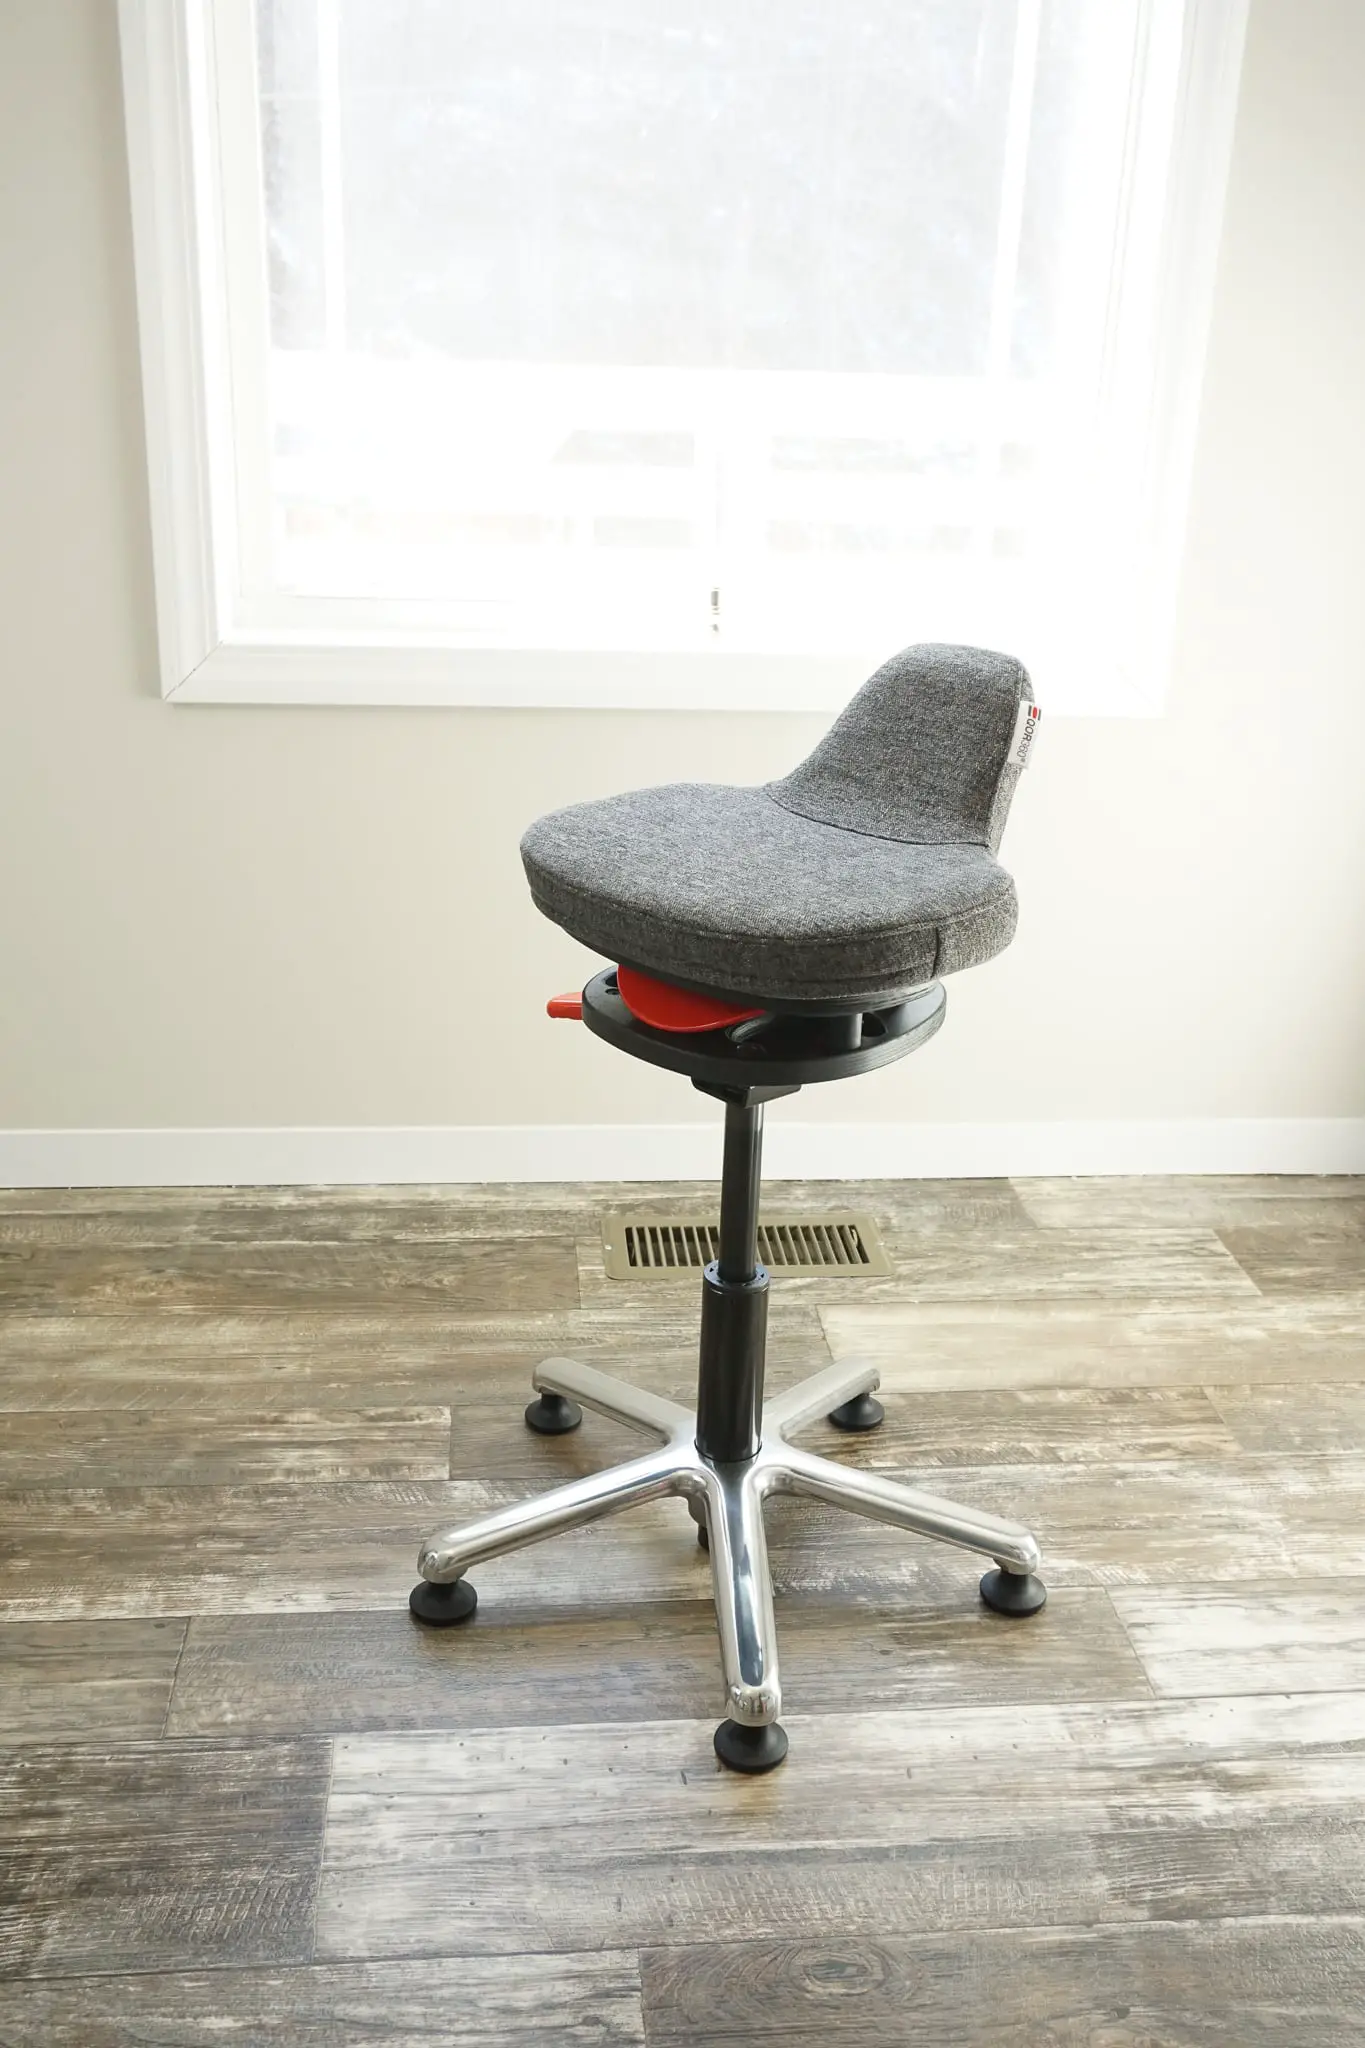 Discover The Benefits Of Active Sitting With the QOR360